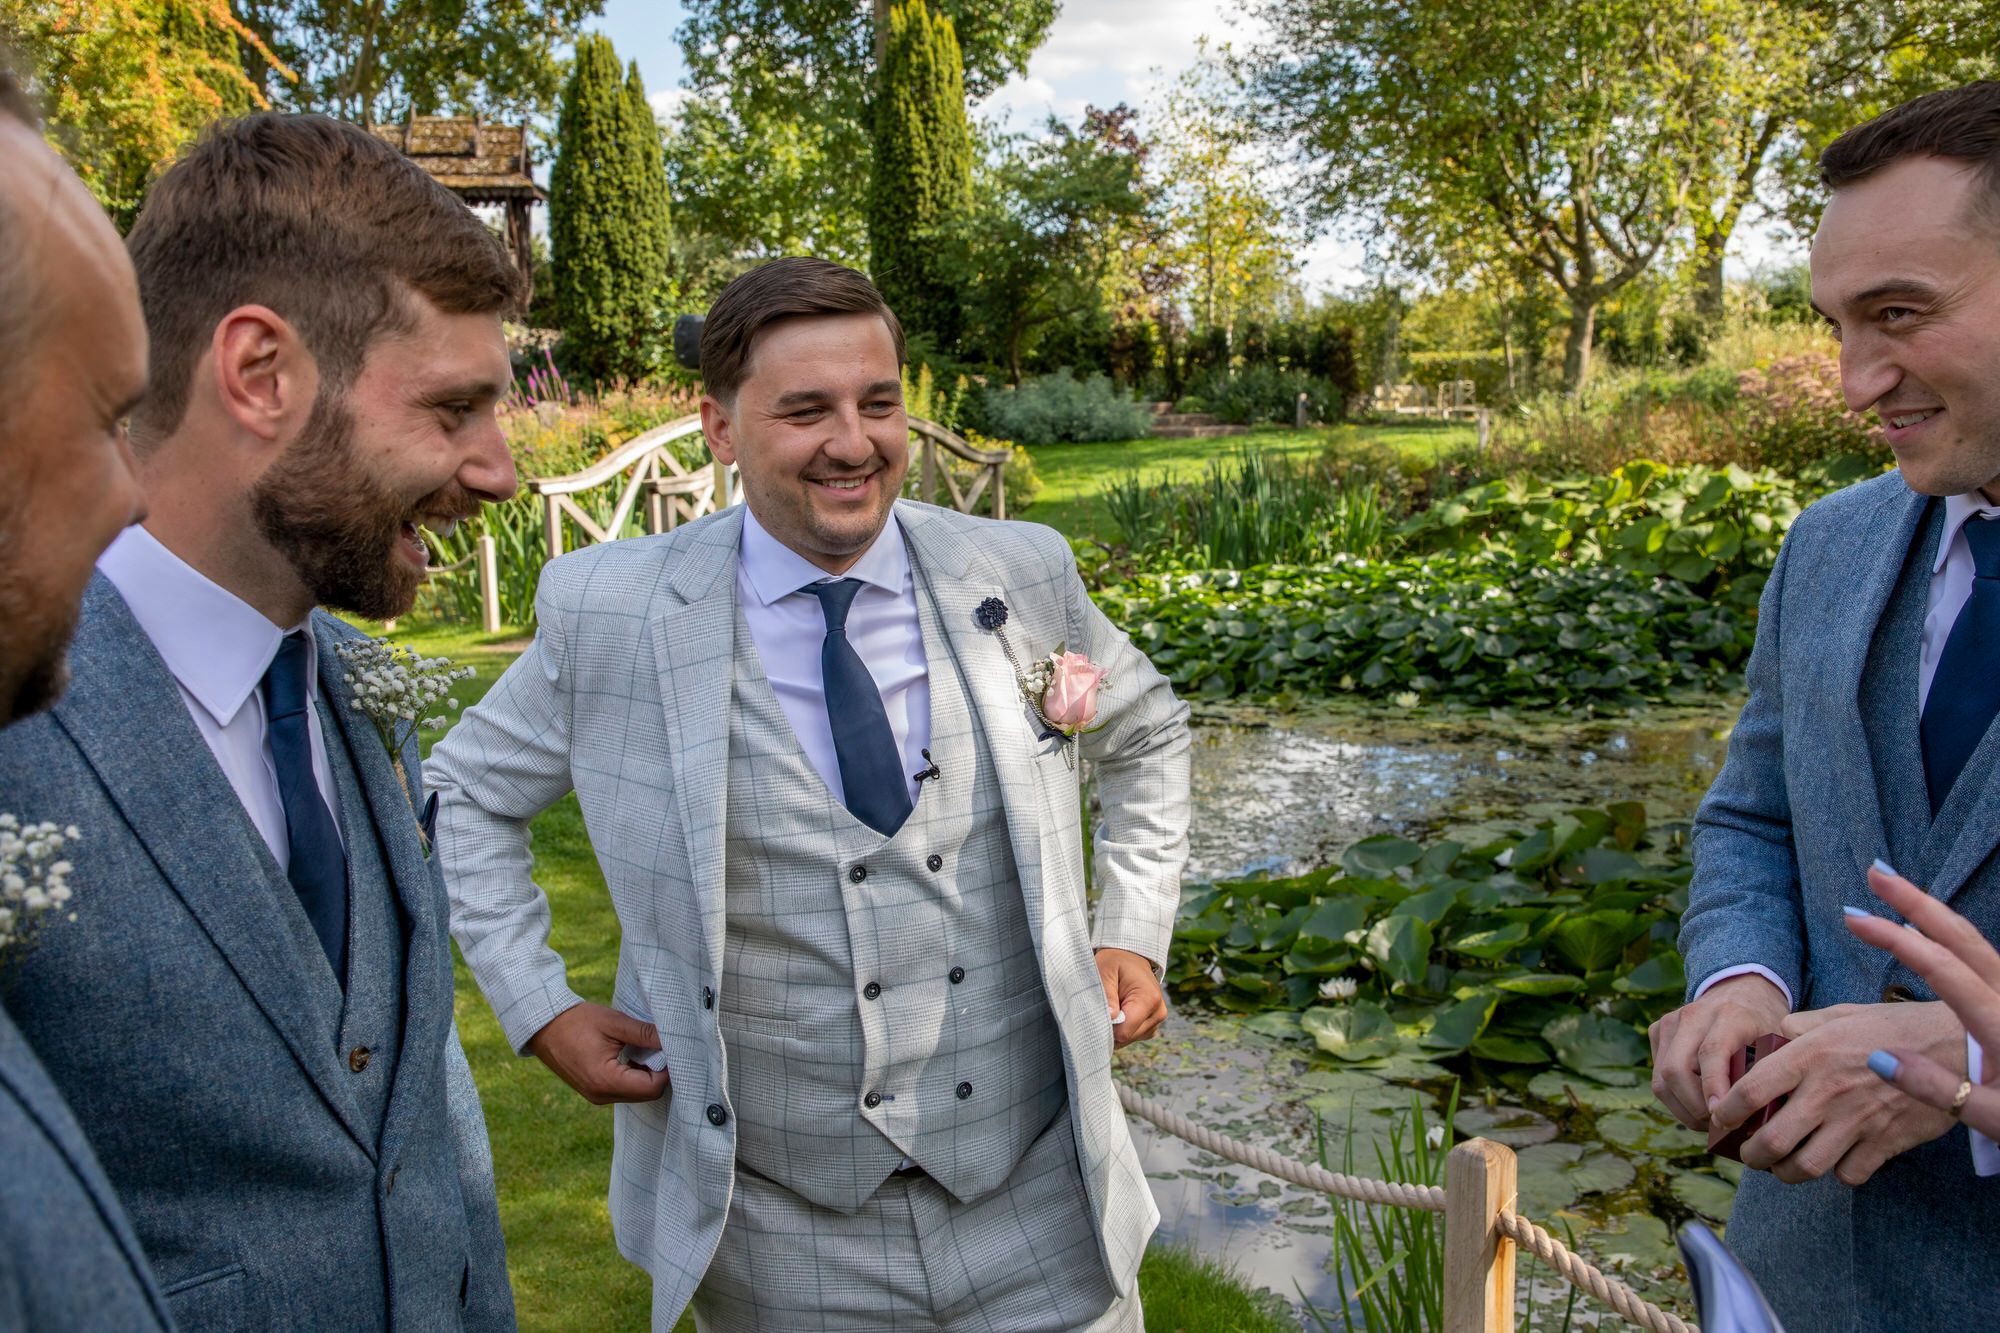 Rafal and his groomsmen waiting by the lily pond ahead of the wedding ceremony. Photo thanks to Nigel Charman Photography. 